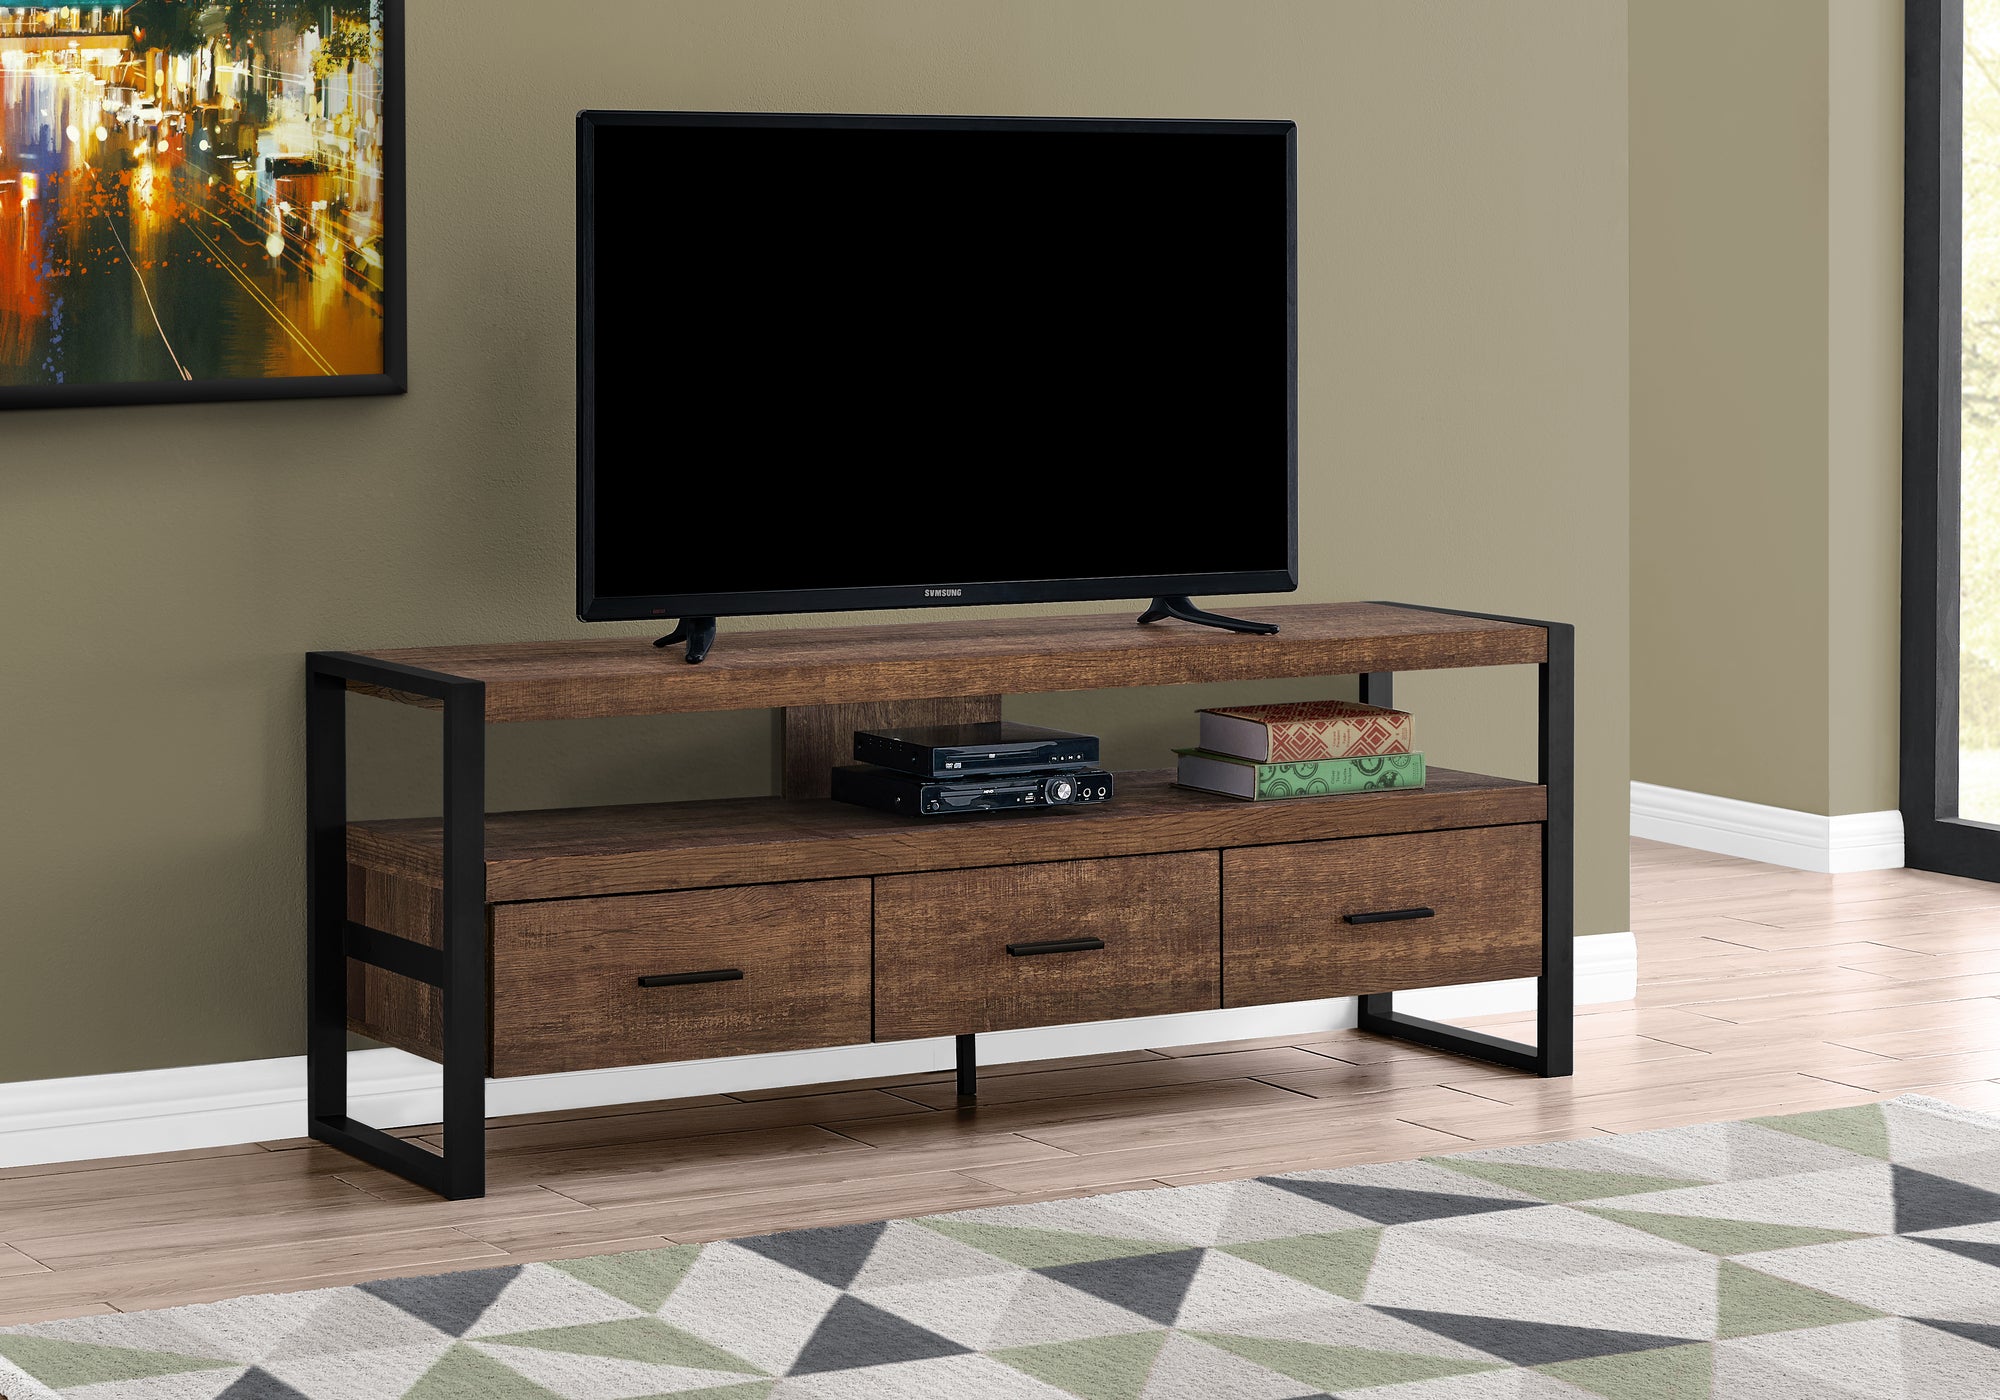 MN-432820    Tv Stand, 60 Inch, Console, Media Entertainment Center, Storage Cabinet, Living Room, Bedroom, Laminate, Metal, Brown Reclaimed Wood Look, Contemporary, Modern